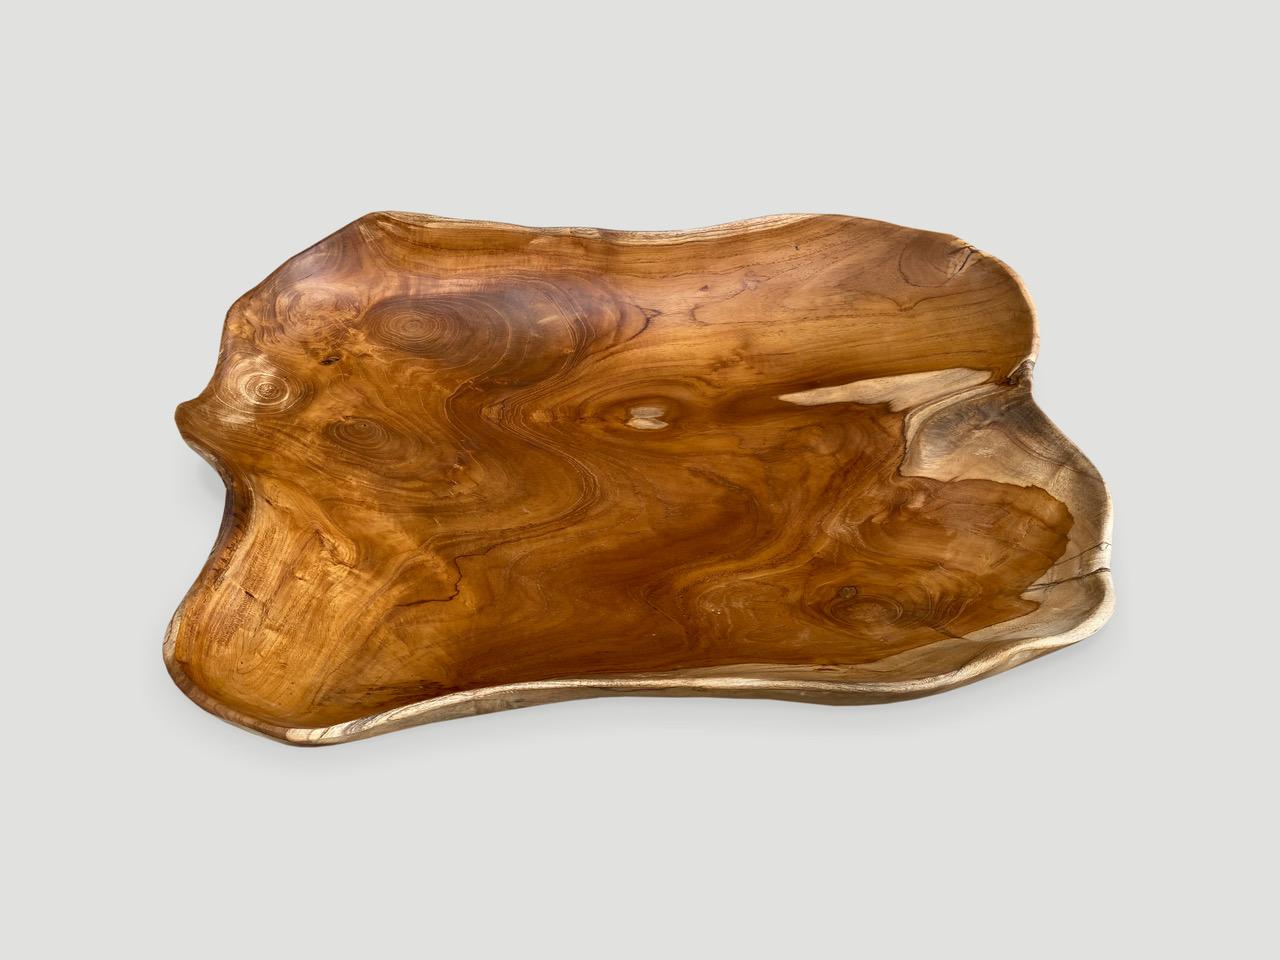 Beautiful grain on this Minimalist teak bowl, hand carved from a single piece of reclaimed natural teak wood.

This bowl or tray was sourced in the spirit of wabi-sabi, a Japanese philosophy that beauty can be found in imperfection and